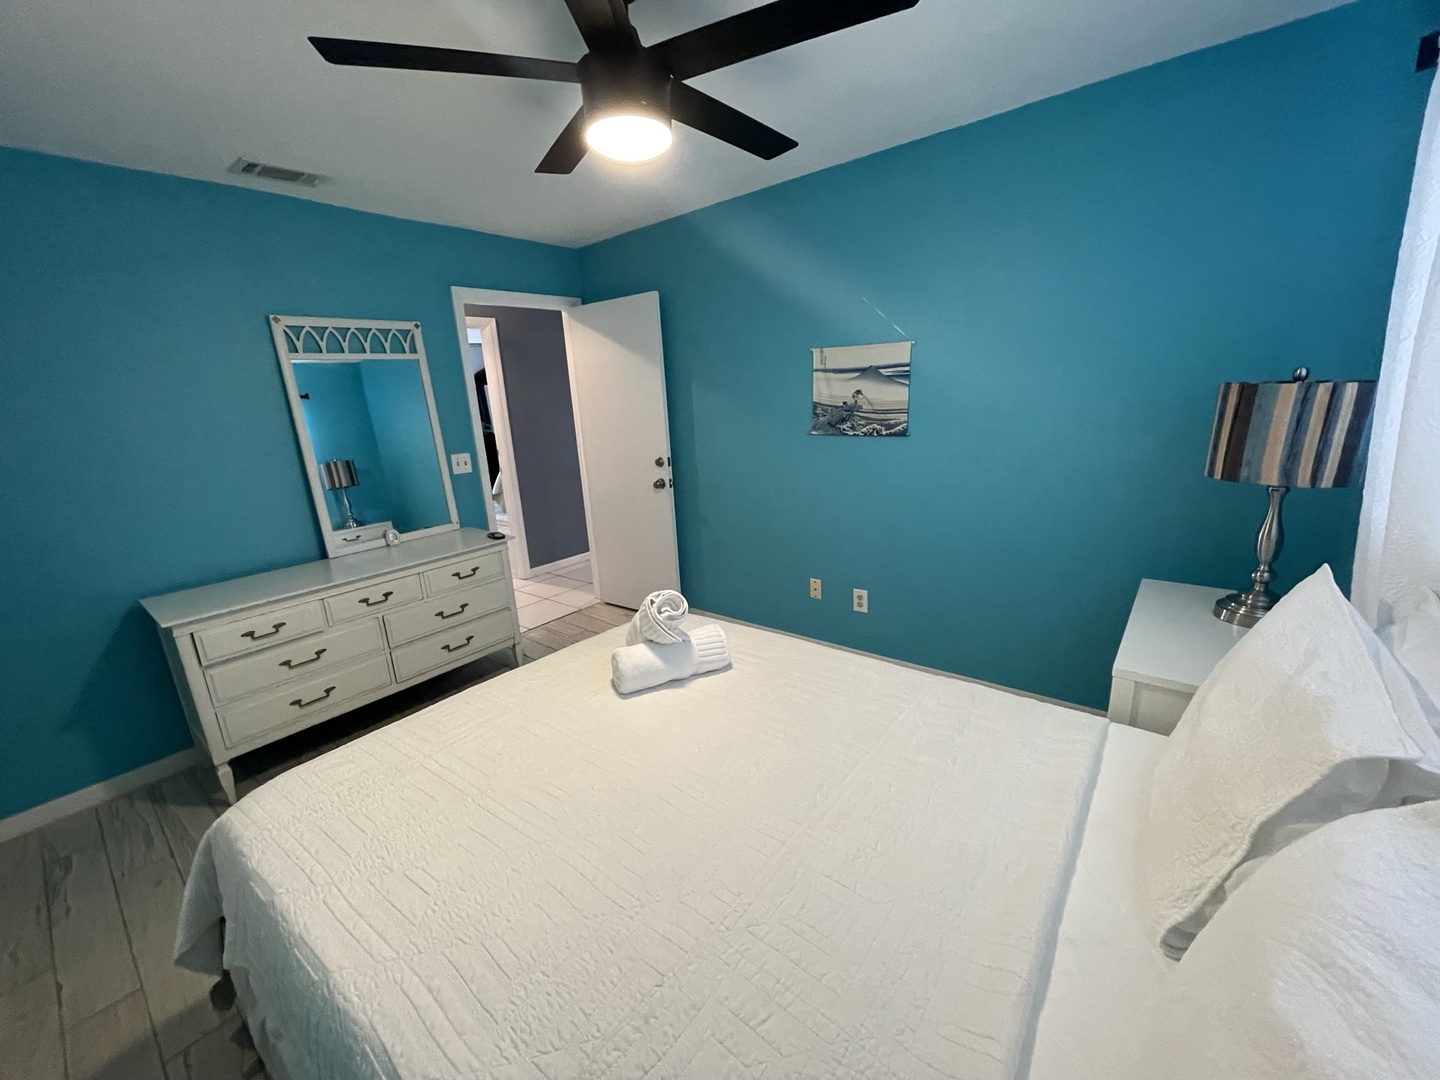 The final bedroom offers a plush queen bed & ceiling fan